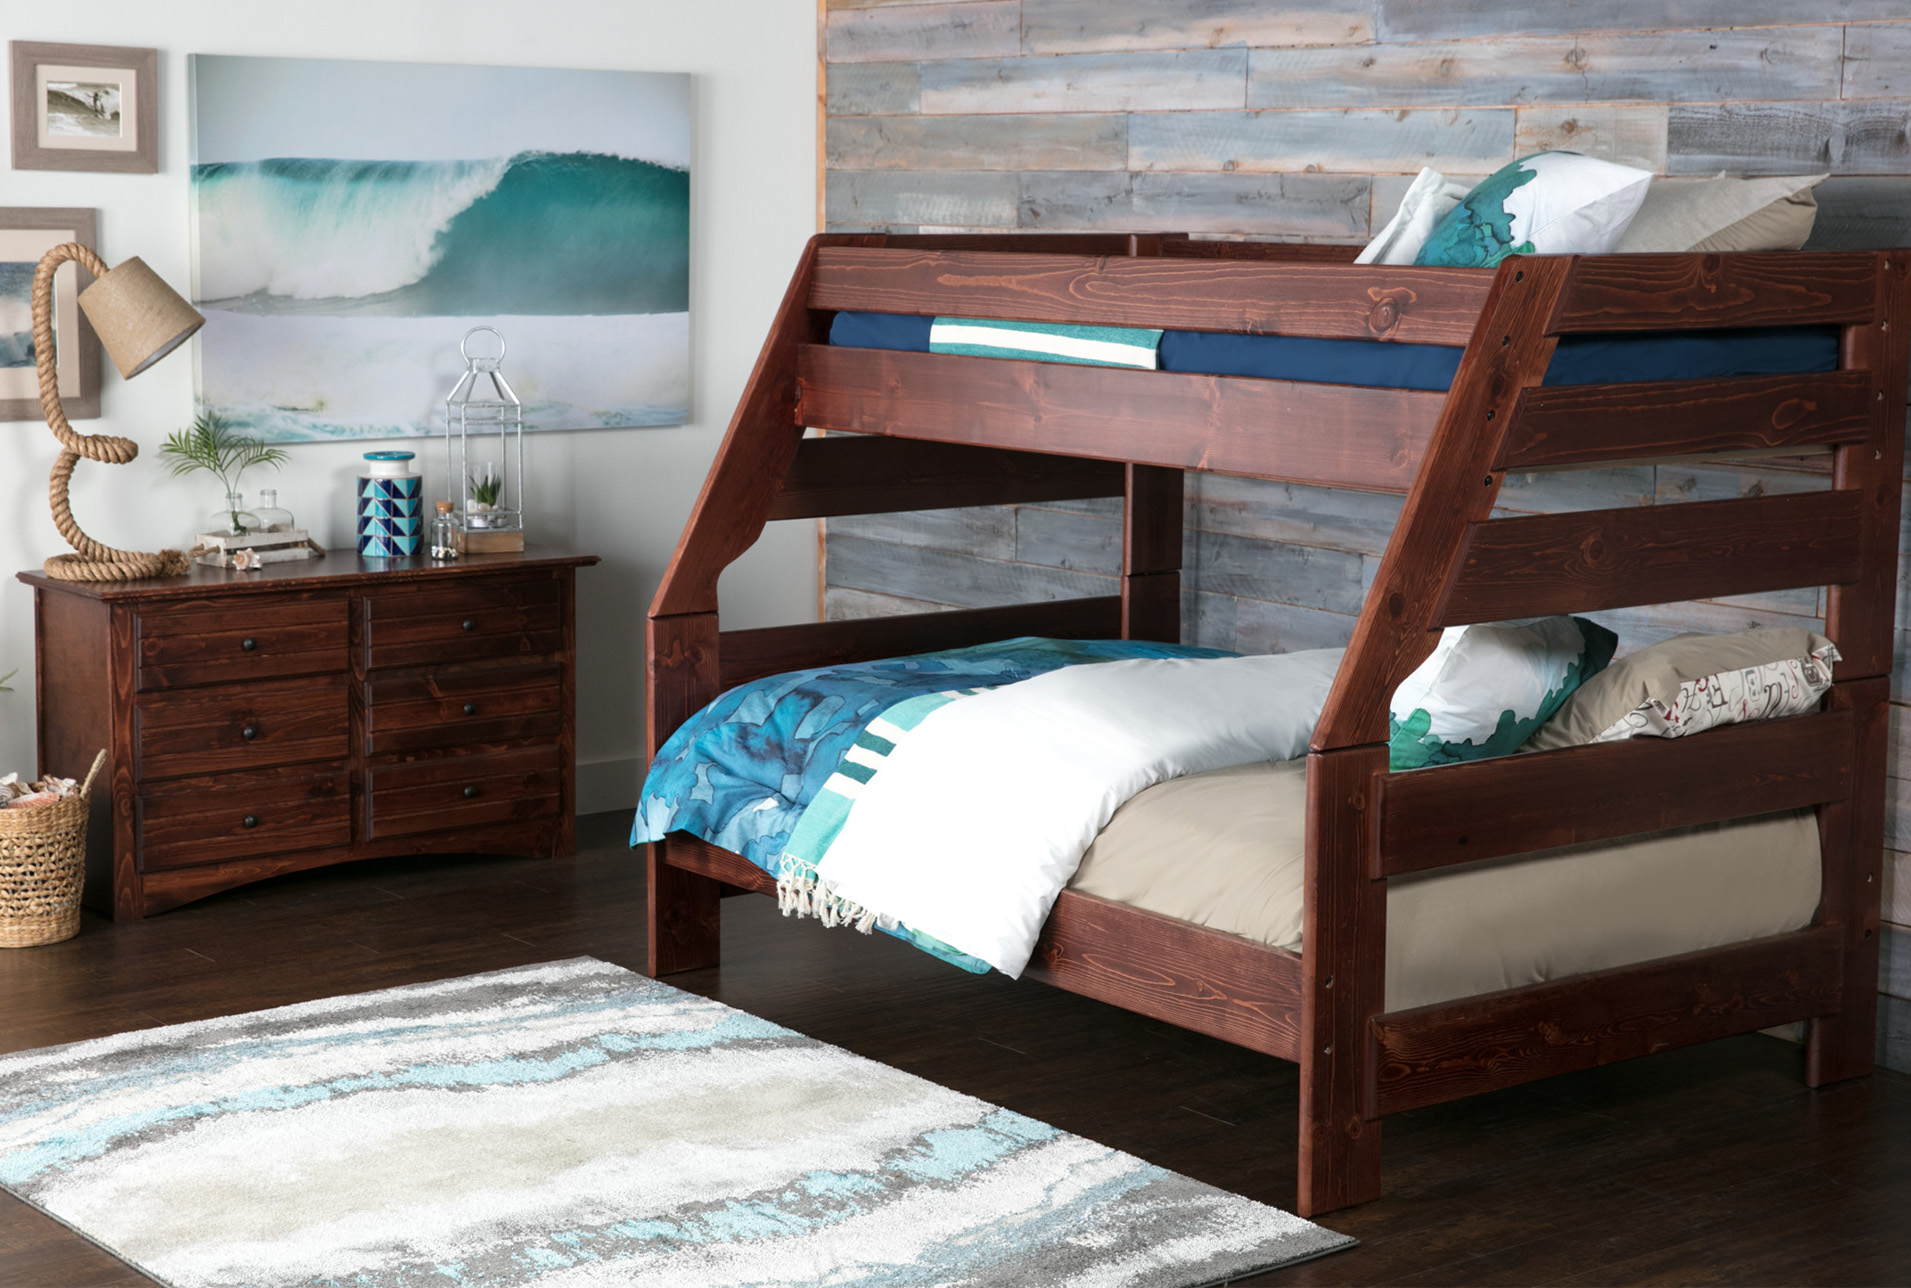 twin over double bunk bed with stairs